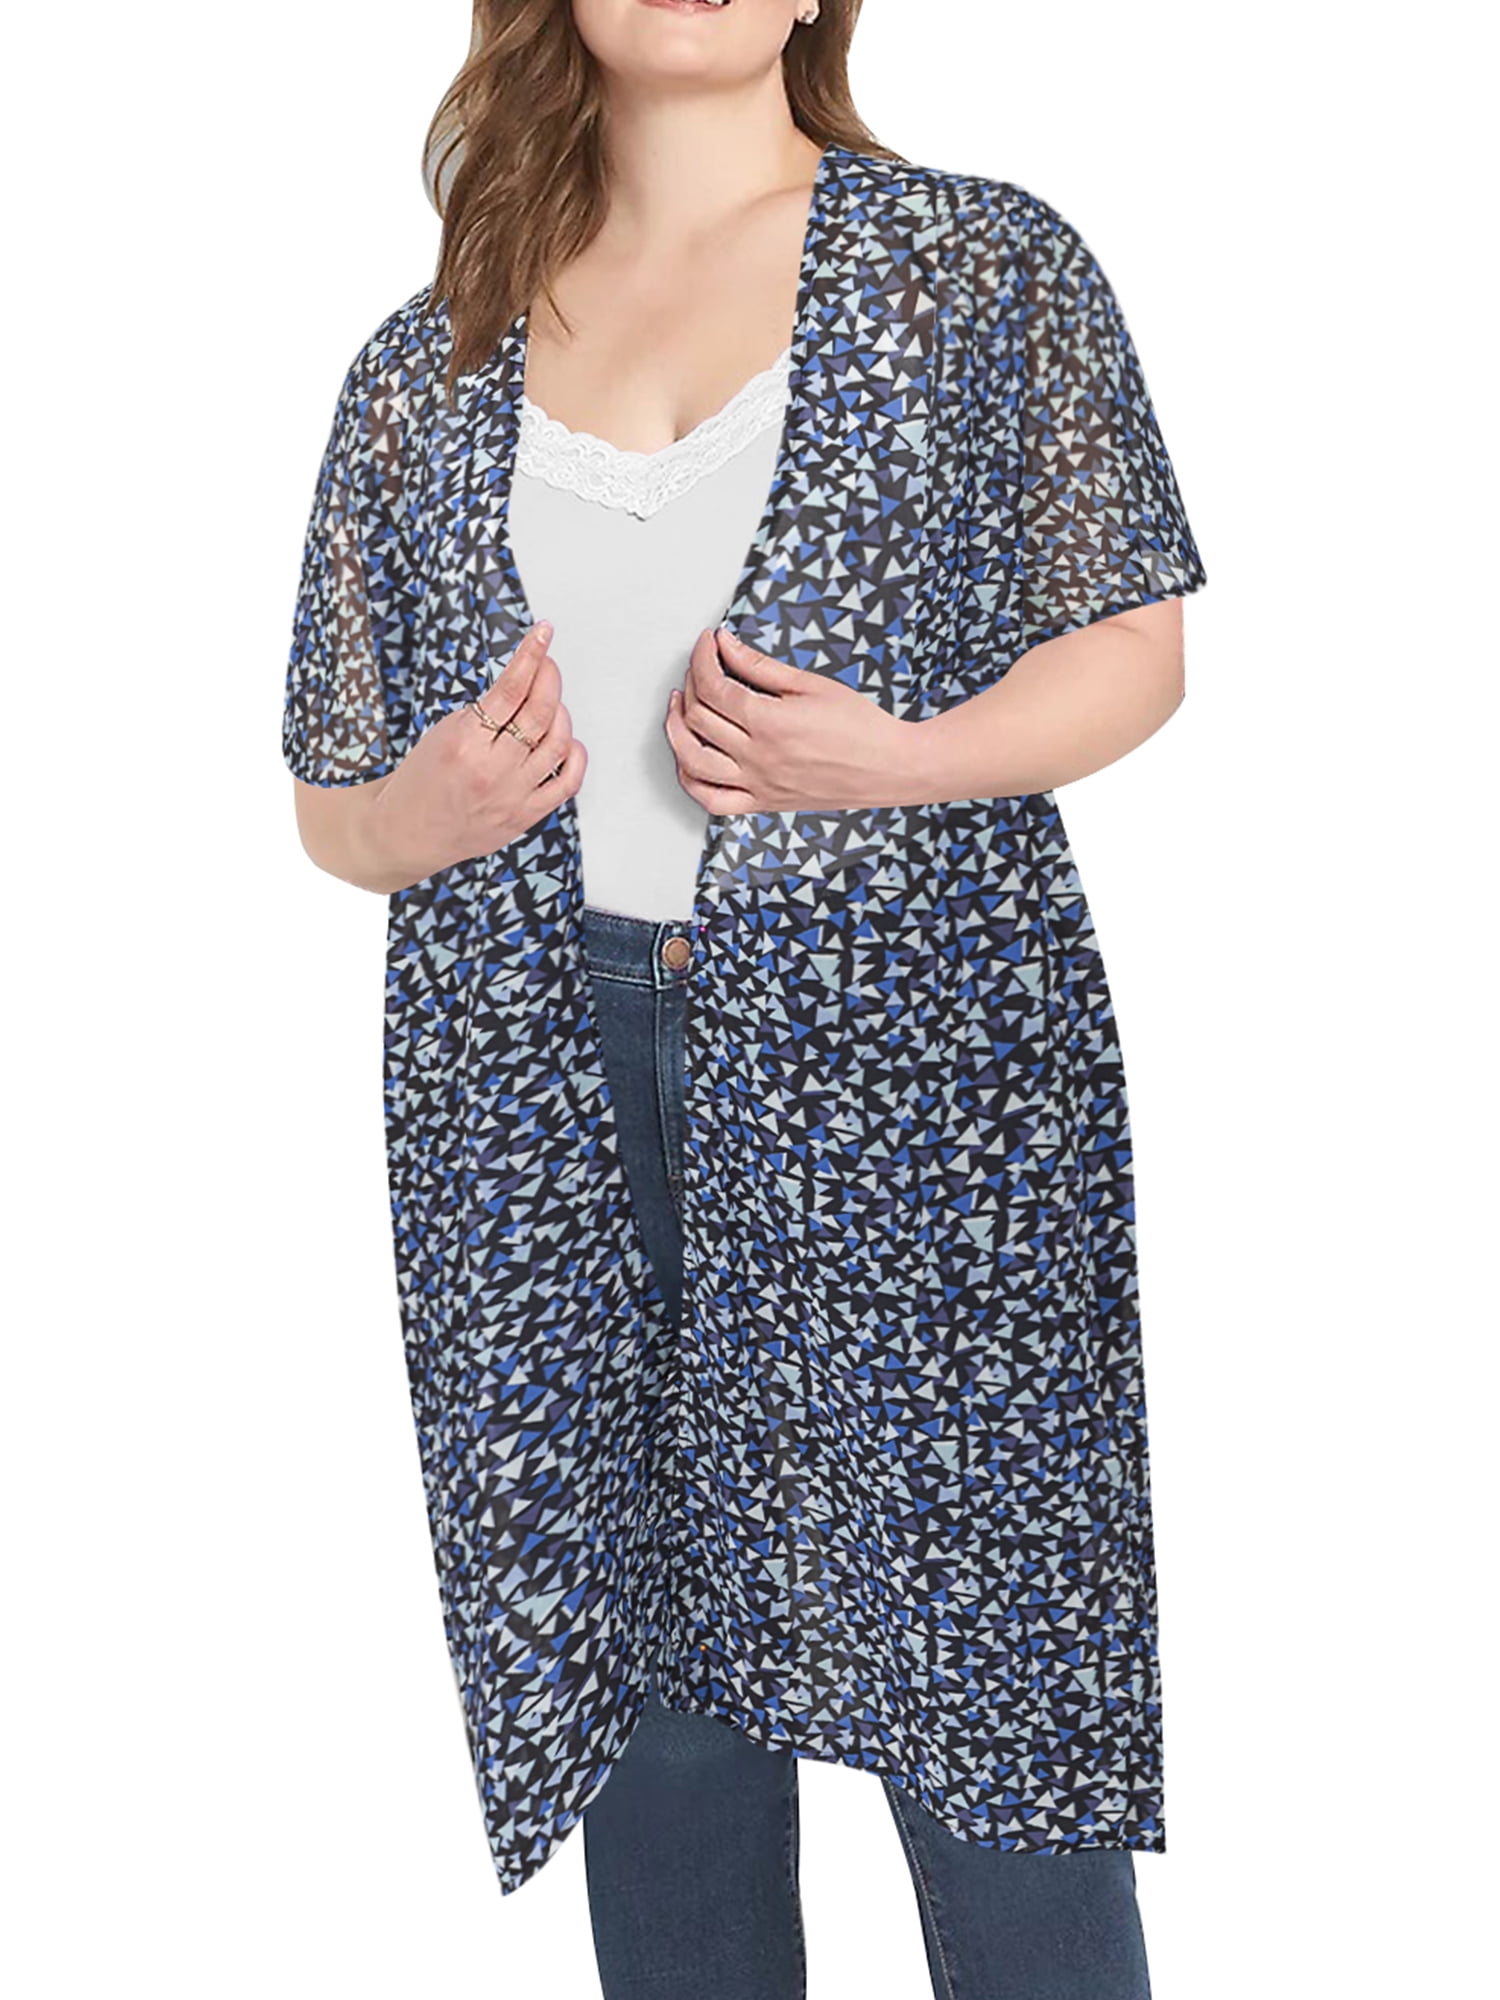 Chama Plus Size Summer Duster Cardigans for Women Open Front